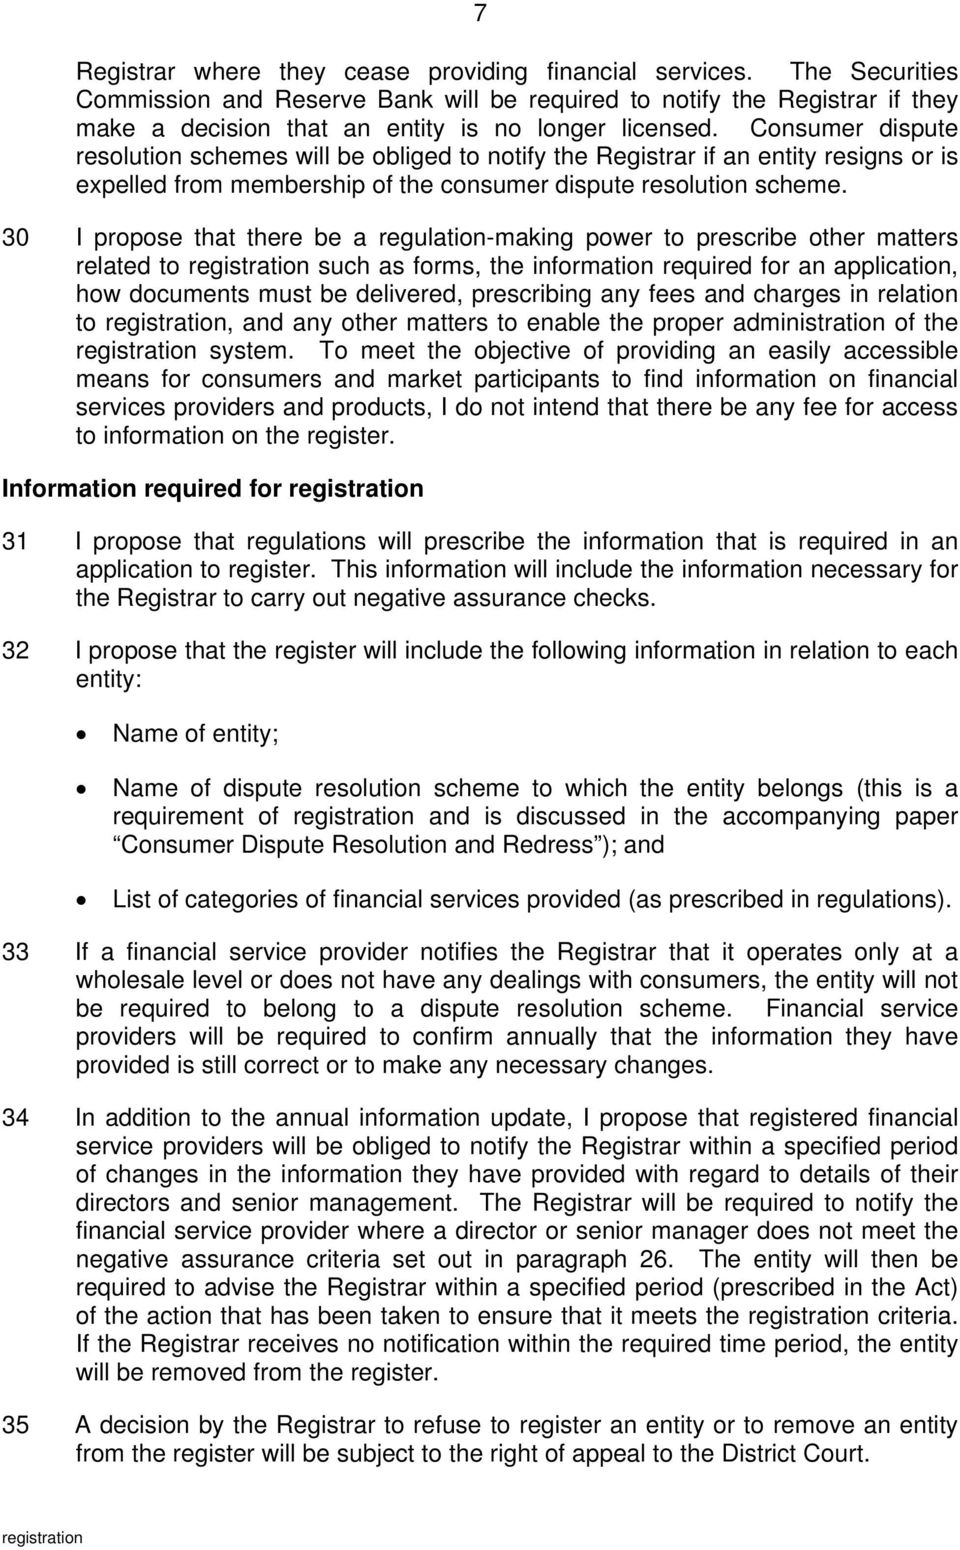 Consumer dispute resolution schemes will be obliged to notify the Registrar if an entity resigns or is expelled from membership of the consumer dispute resolution scheme.